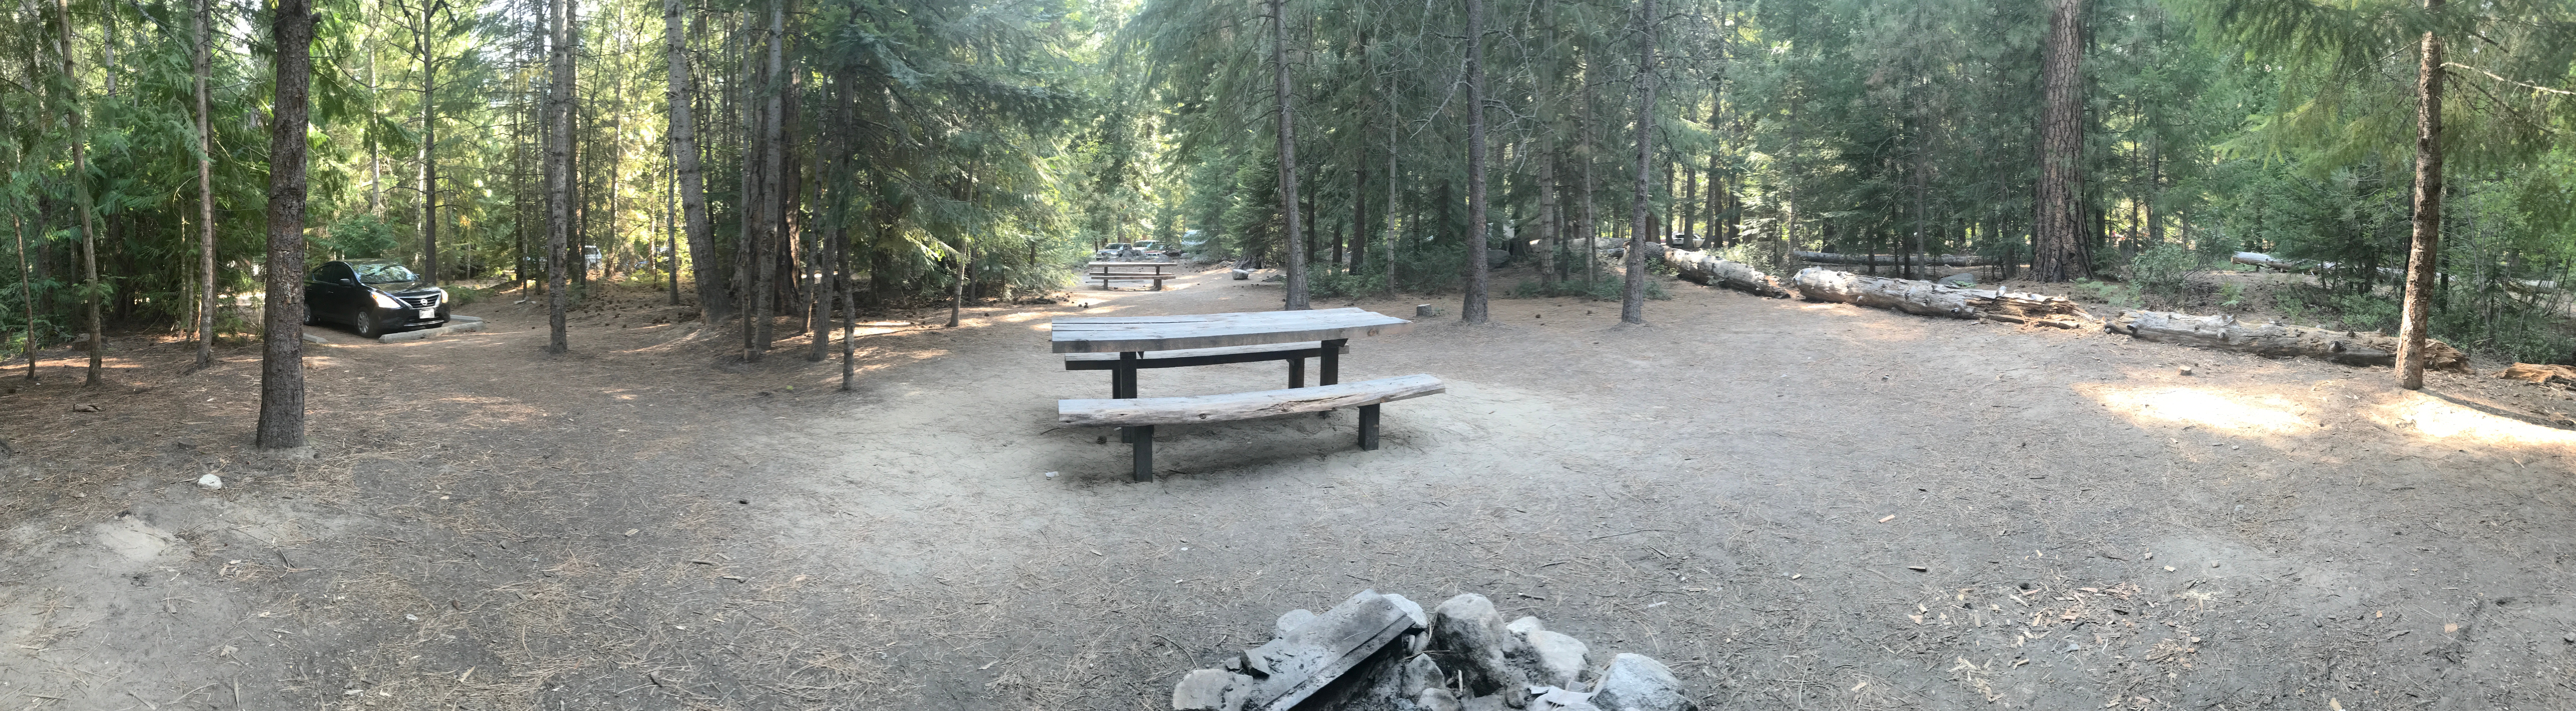 Camper submitted image from Fox Creek Campground - 5